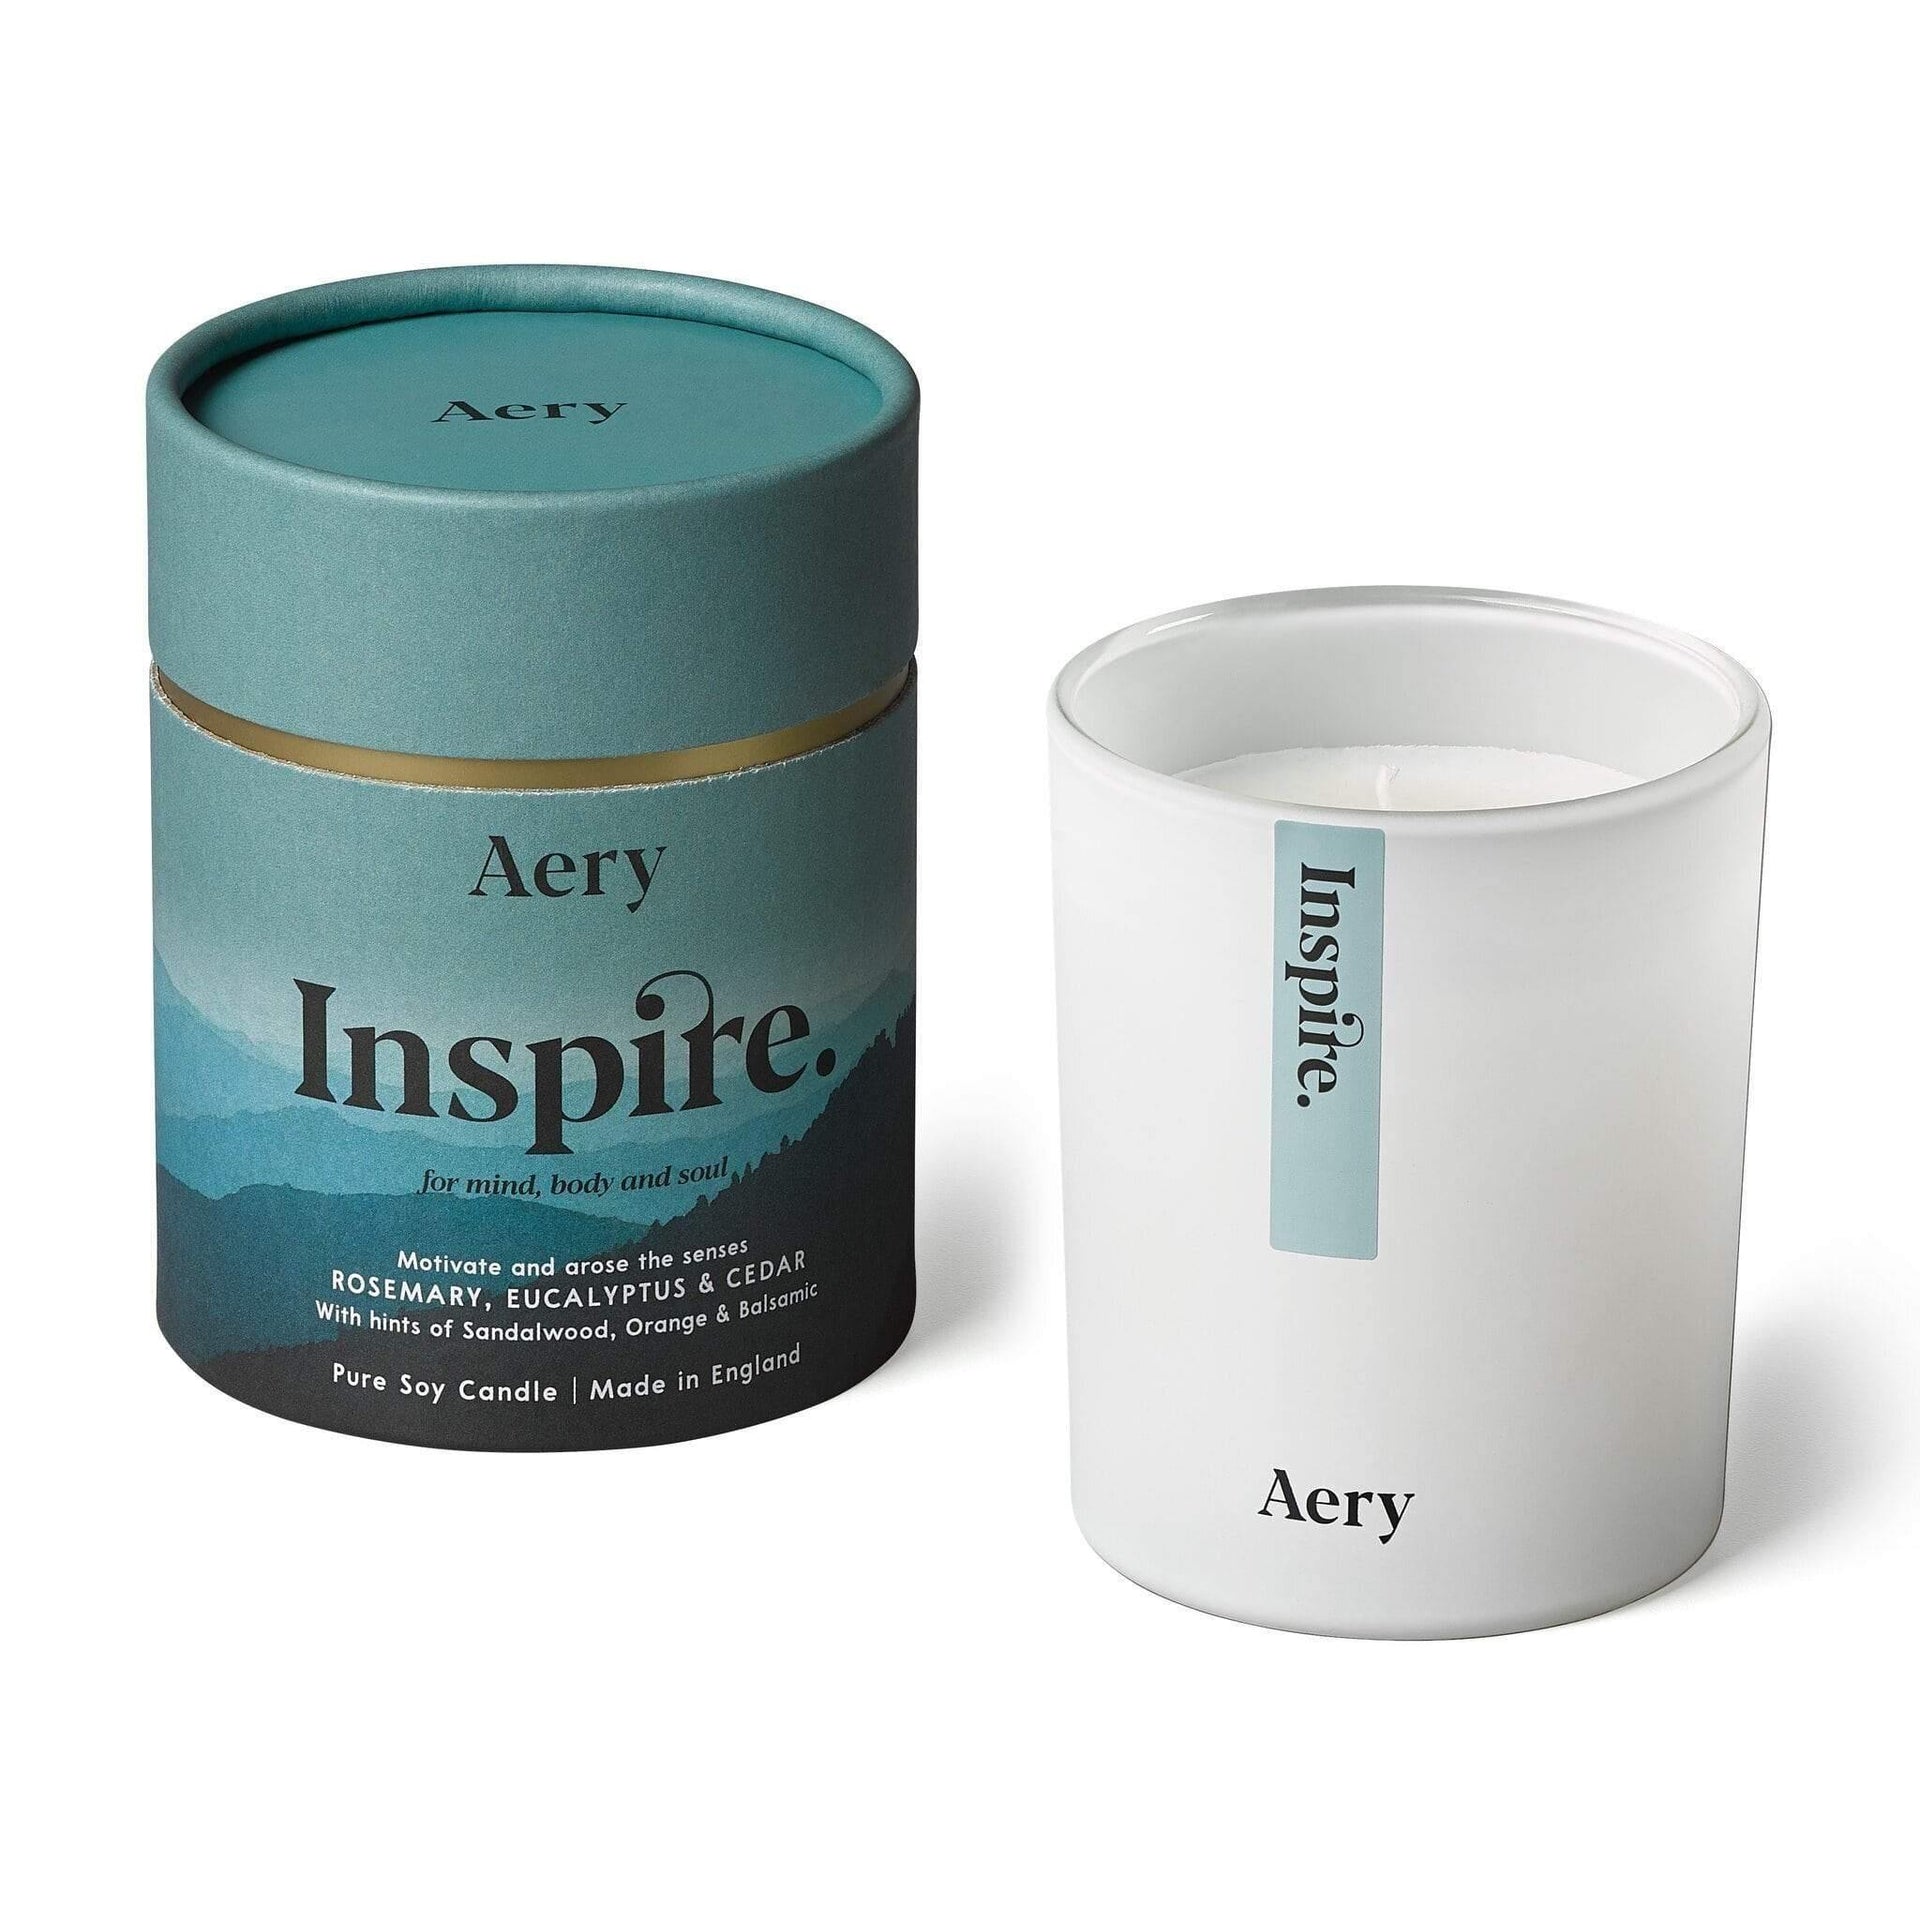 Aery Living Mindful 200g Soy Candle-Inspire  | Scented Candles | Candle Fragrances | Soy Candles | Newcastle Candles | Best Candles | Nice Candles | Gifts | Best Gifts | Wax Candles | Mothers Day Gifts | Christmas Gifts | Candles Australia | Candle Shop | Presents | Sydney Candles | Brisbane Candles | Townsville Candles | Melbourne Candles | Perth Candles | Soy Wax | Accepts Bitcoin | Candles Online | Accepts Crypto currency | Upcycle Studio